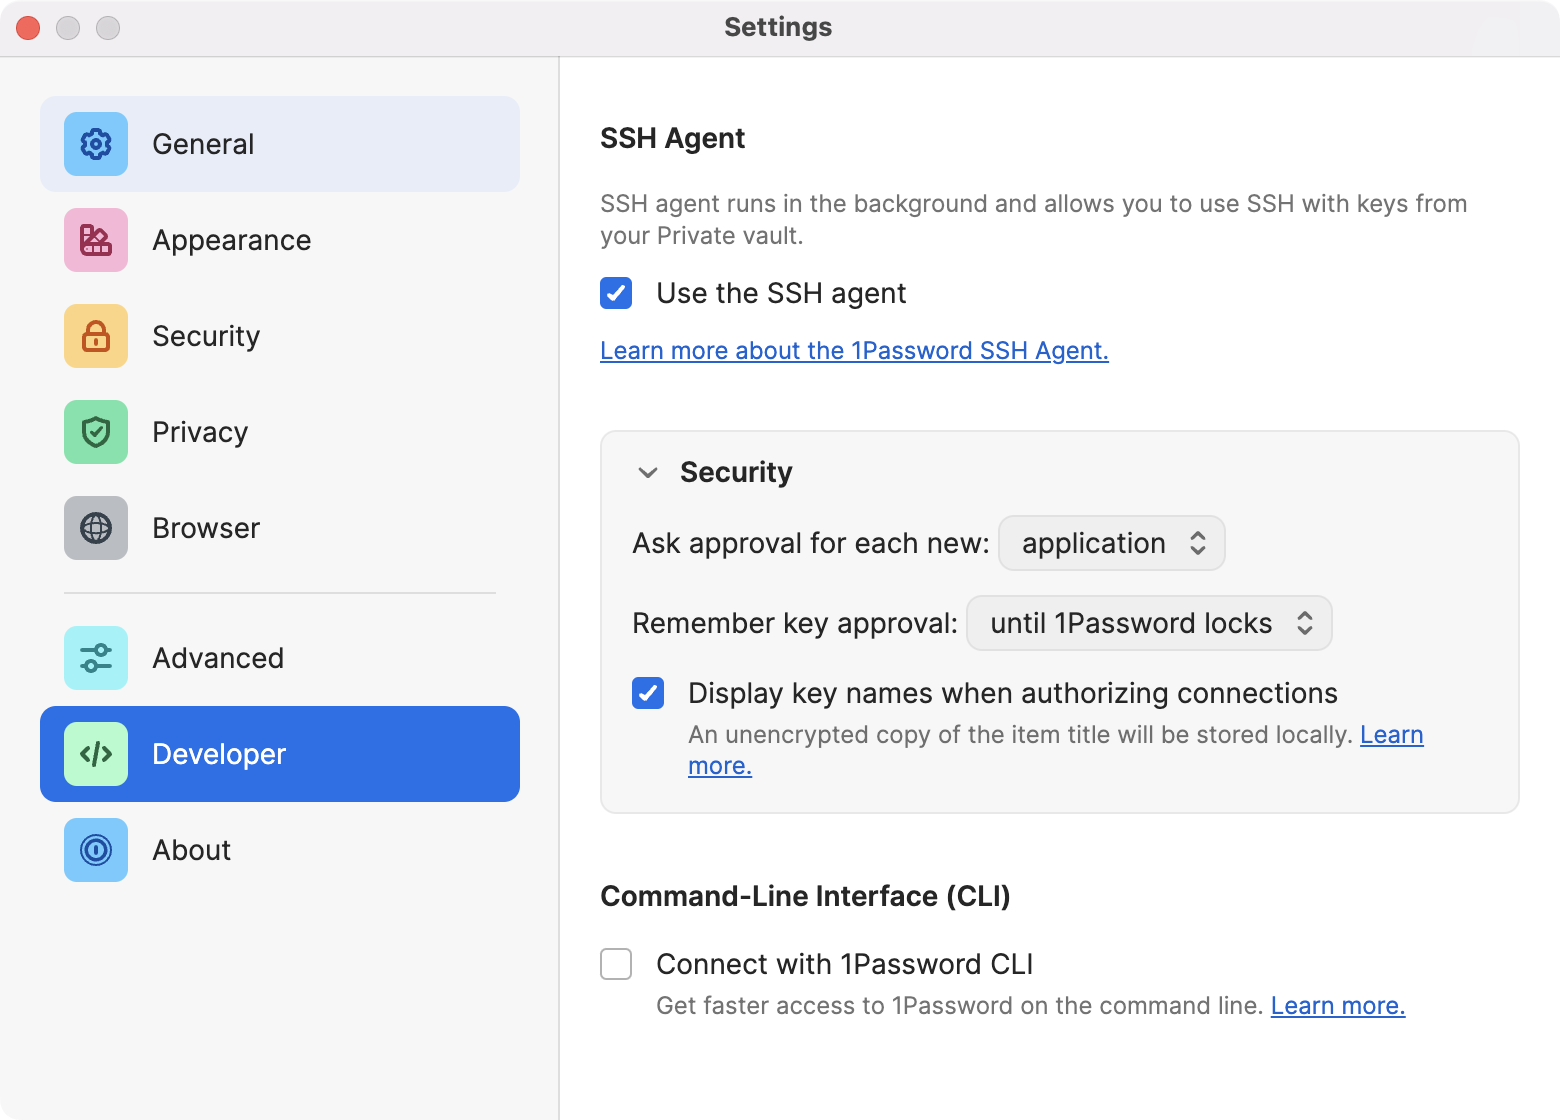 1Password 8 — Turning On the SSH Agent